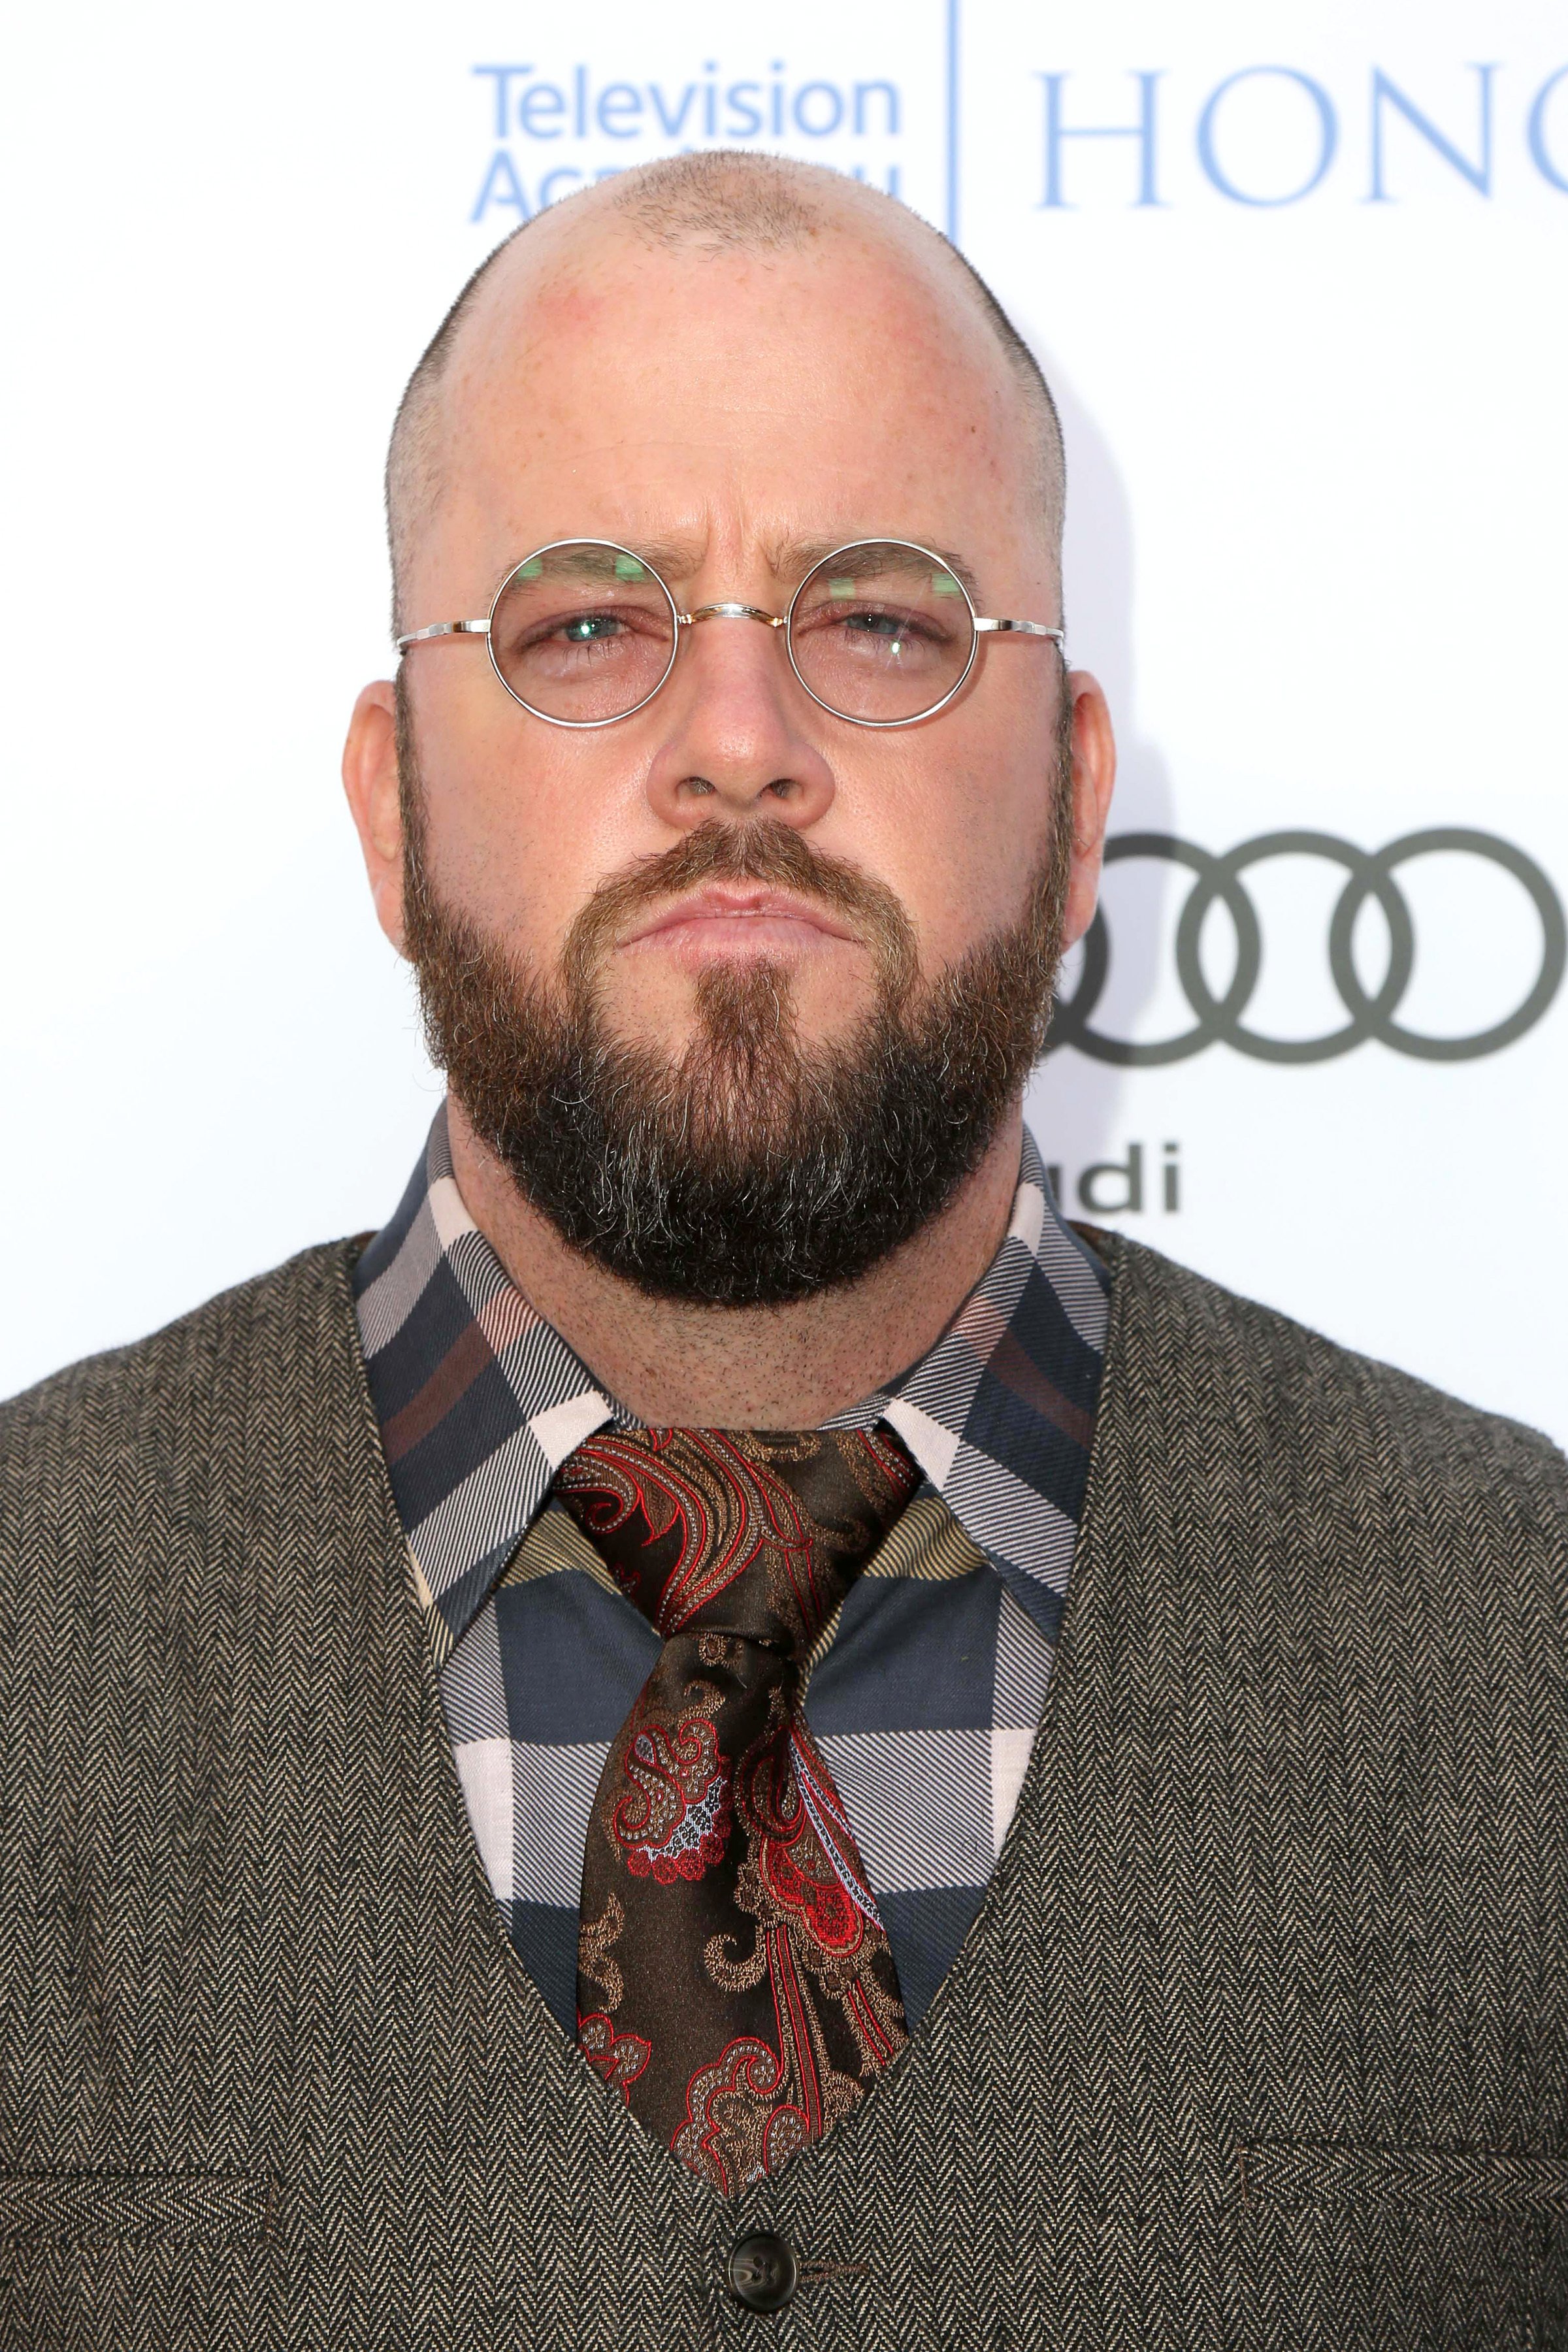 Chris Sullivan at the 10th Annual Television Academy Honors at the Montage Hotel on June 8, 2017 in Beverly Hills, California | Photo: Shutterstock